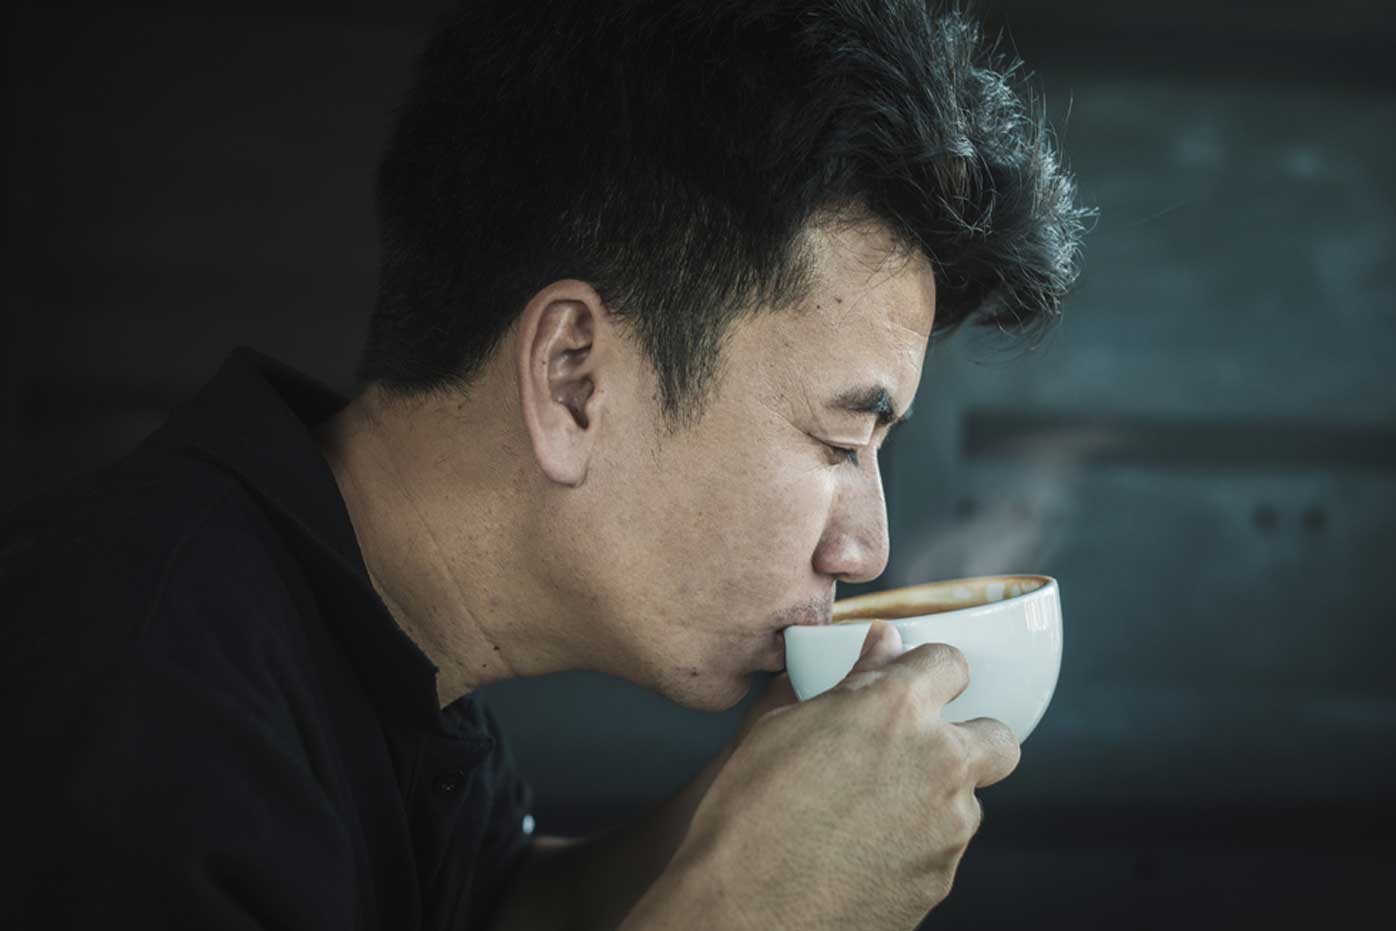 A man carefully sips a drink of coffee